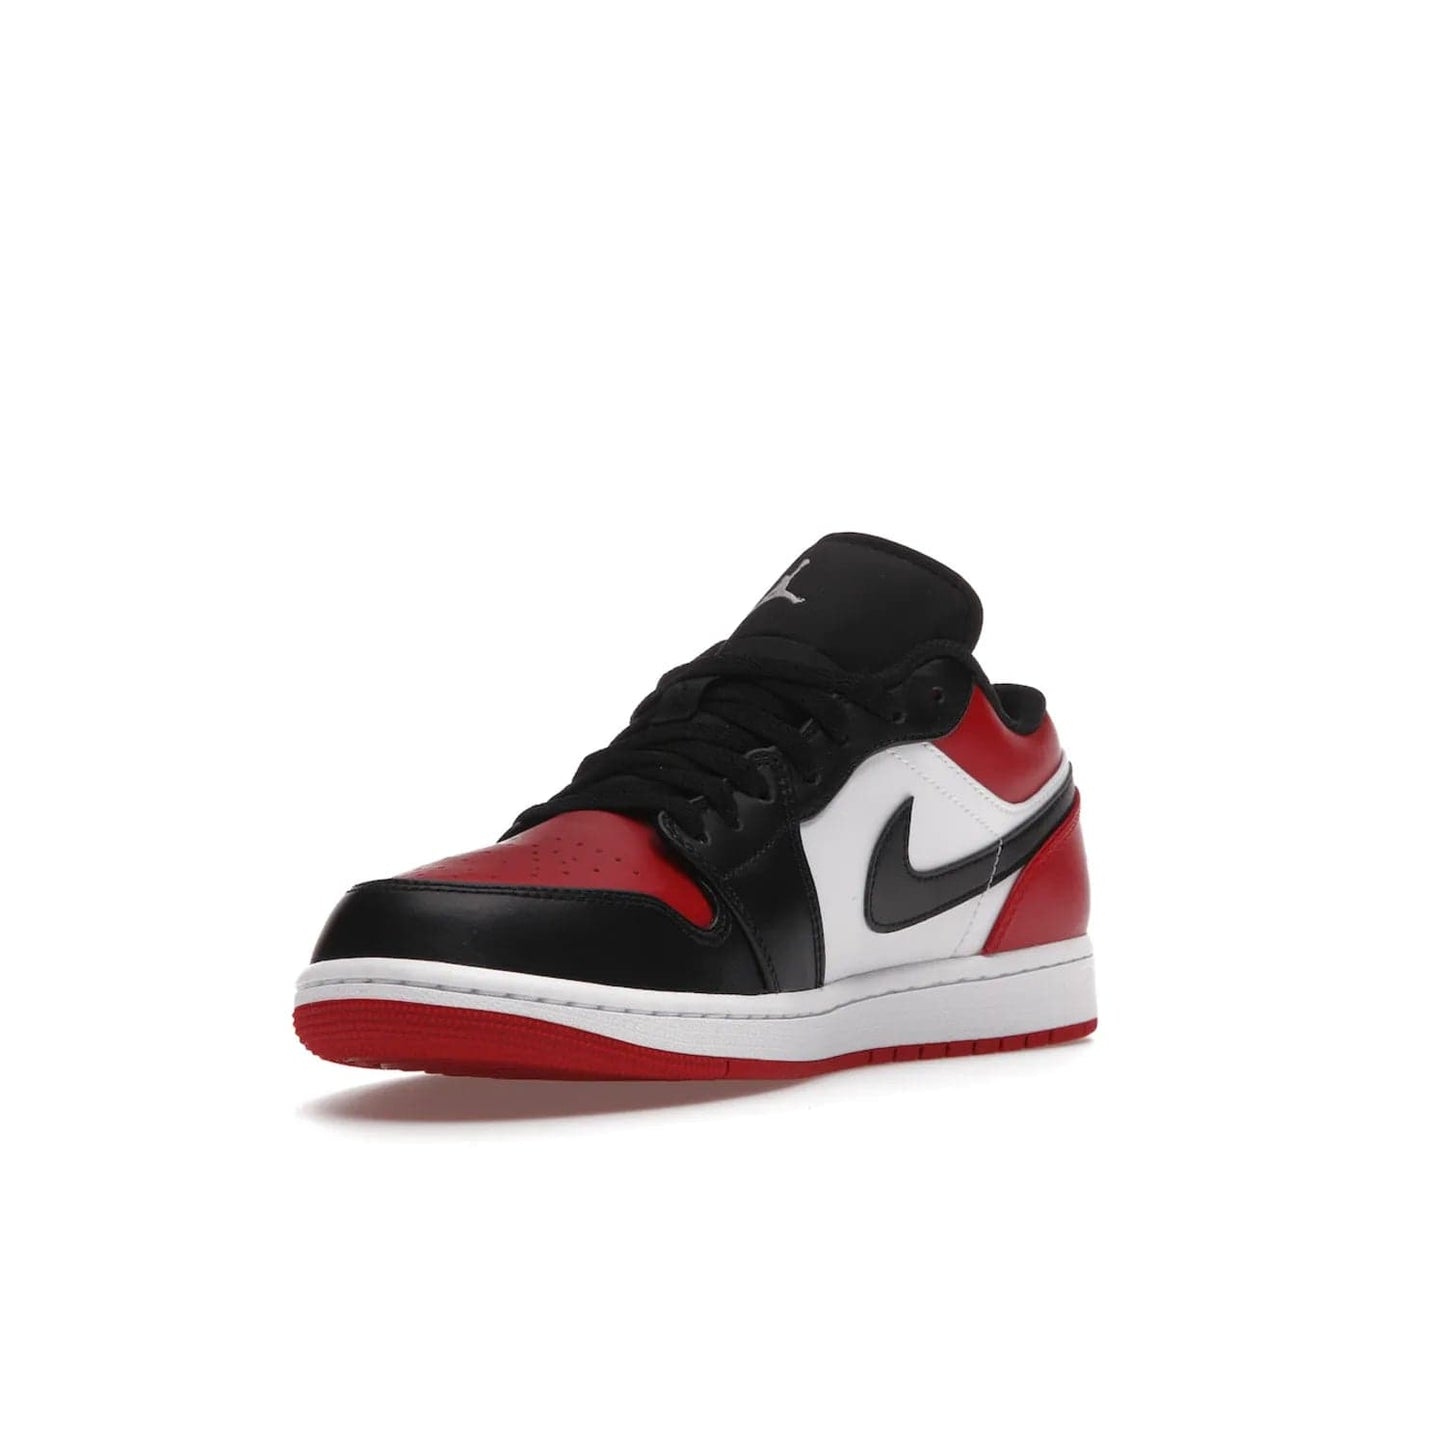 Jordan 1 Low Bred Toe - Image 14 - Only at www.BallersClubKickz.com - Step into the iconic Jordan 1 Retro. Mixing and matching of leather in red, black, and white makes for a unique colorway. Finished off with a Wing logo embroidery & Jumpman label. Comfortable and stylish at an affordable $100, the Jordan 1 Low Bred Toe is perfect for any true sneaker fan.